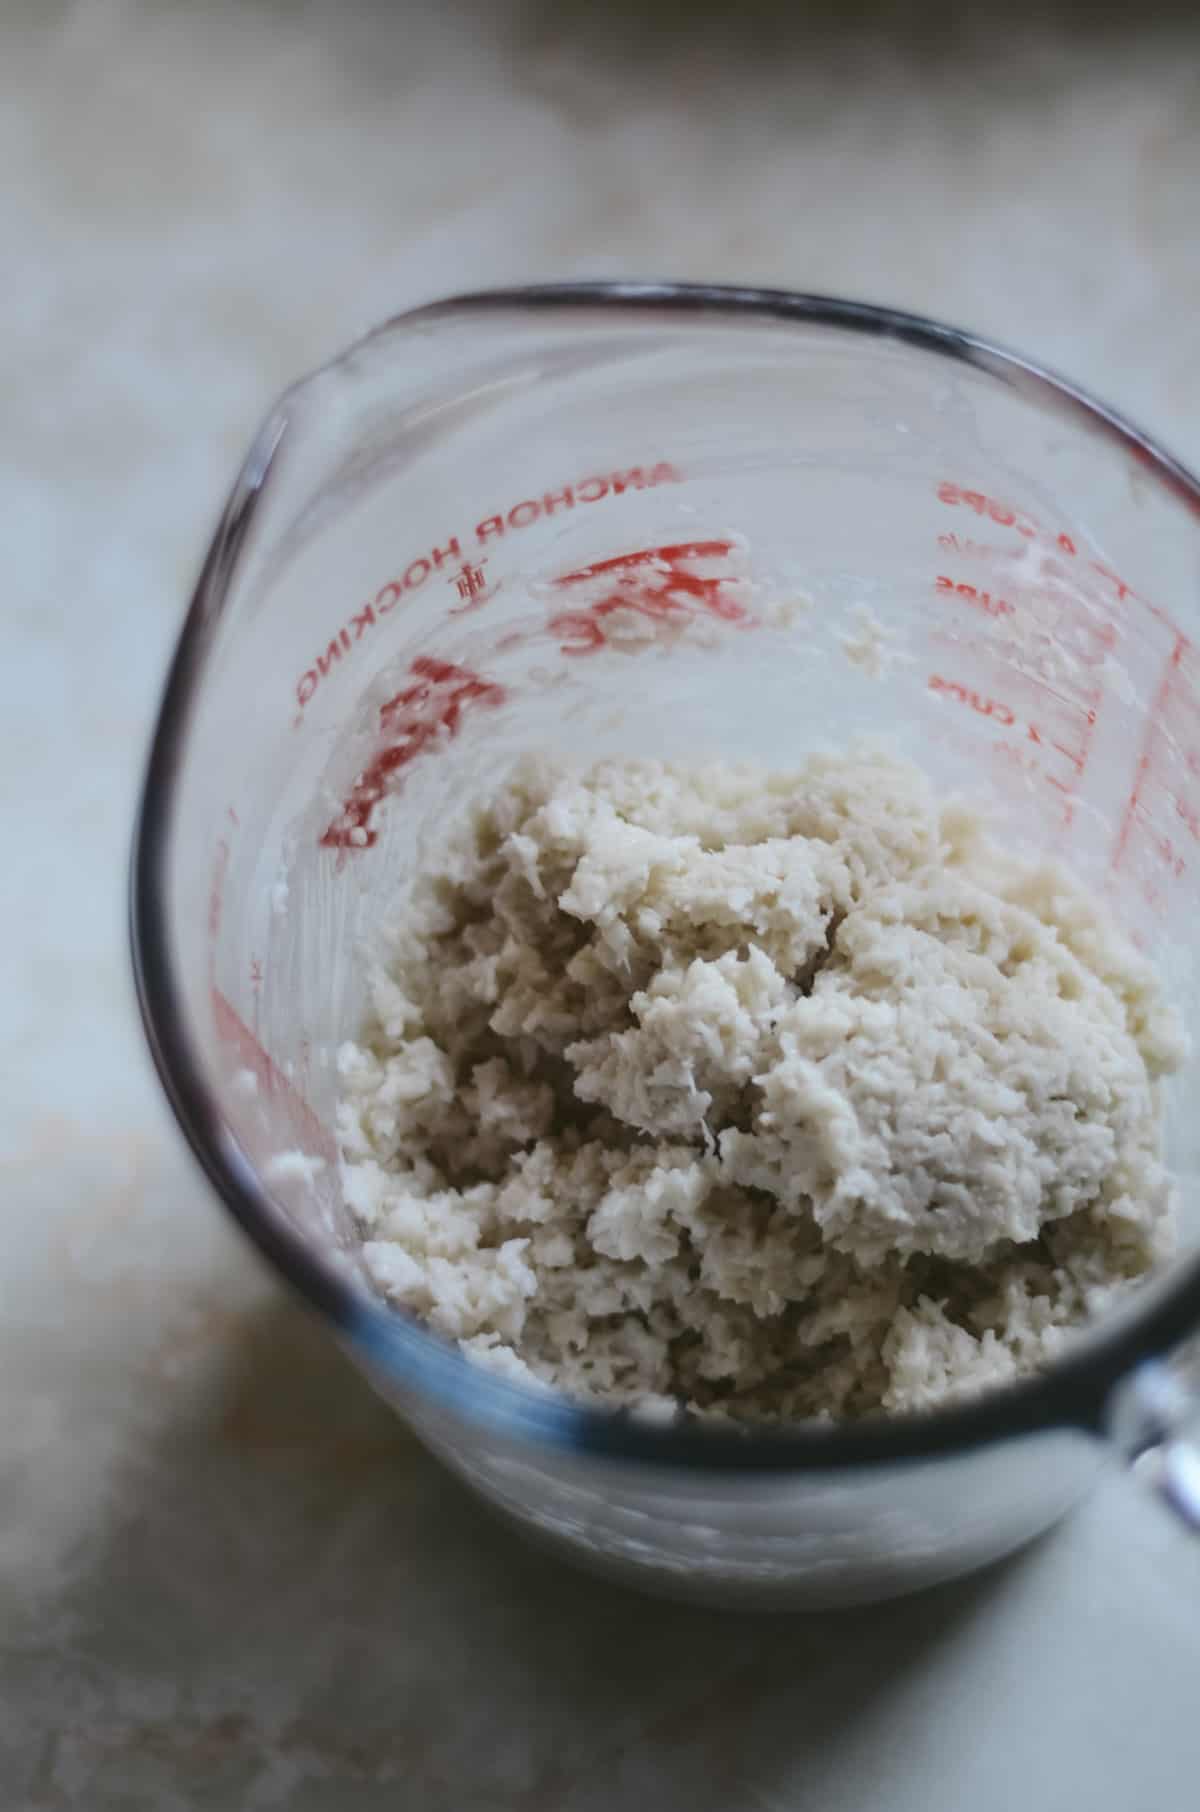 Mixing coconut milk and desiccated coconut in a glass measuring cup.